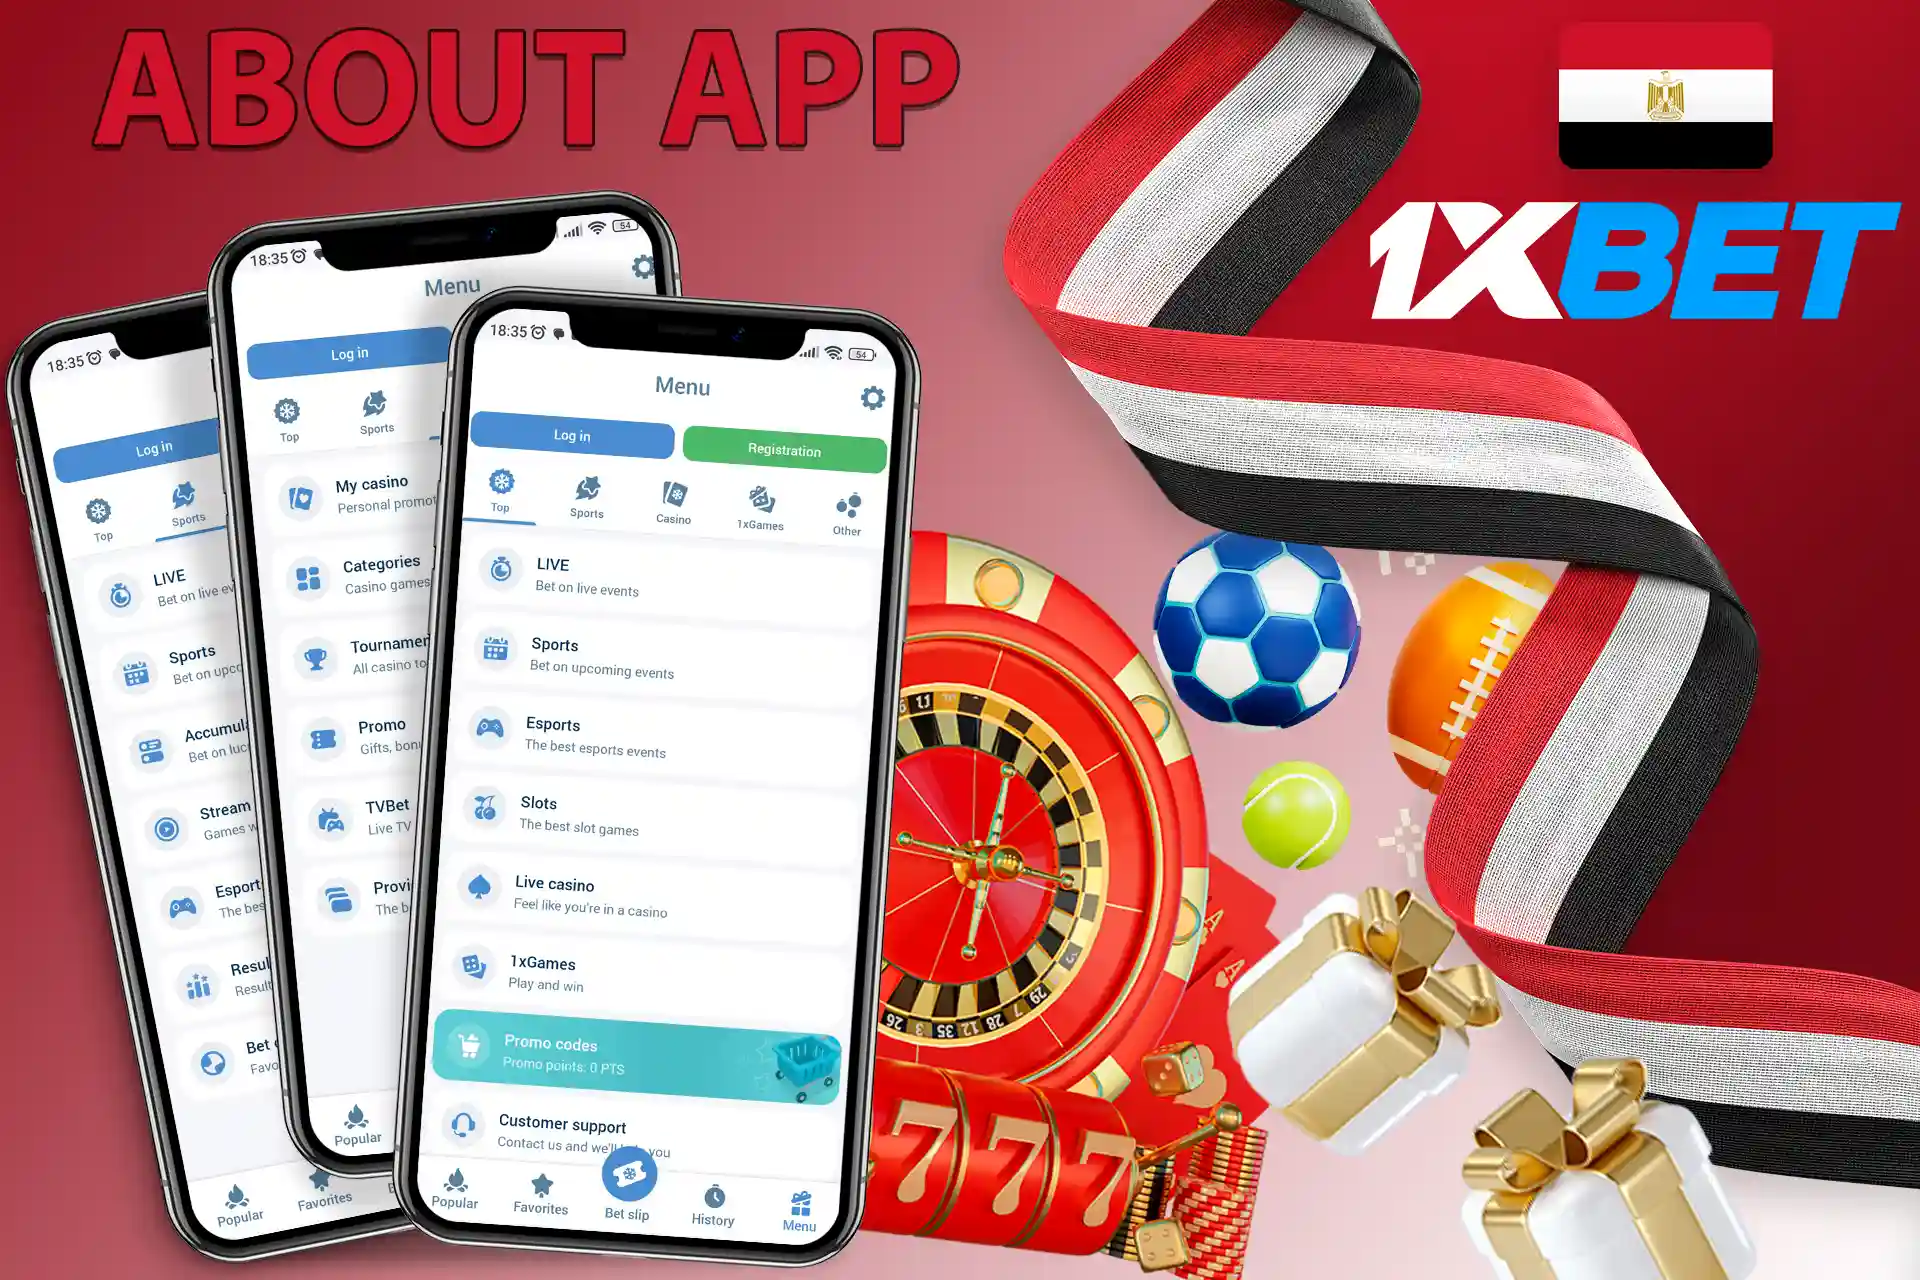 Many features of the 1xBet mobile application